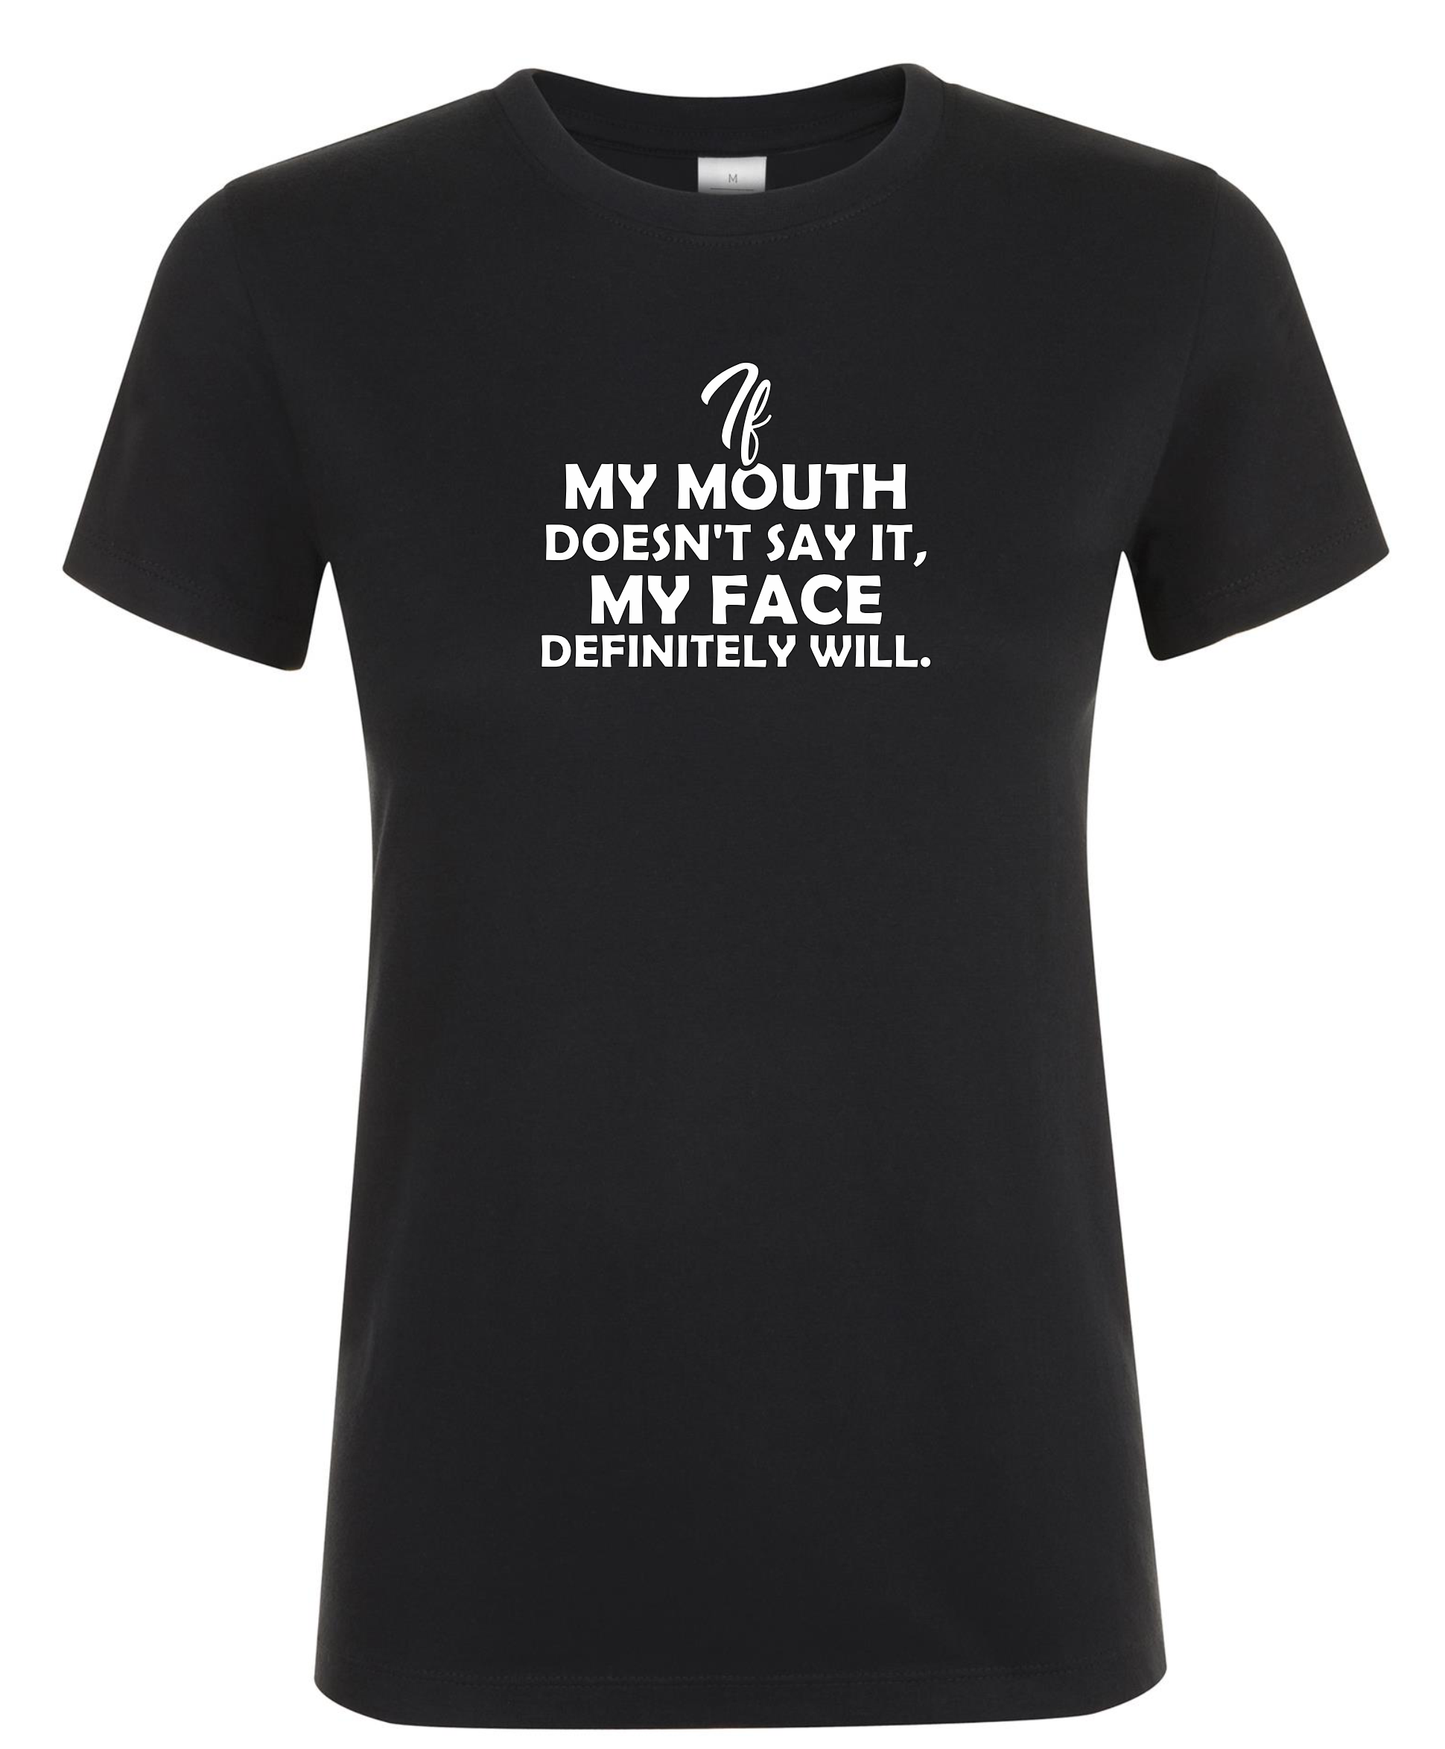 If My Mouth Doesn't Say It...